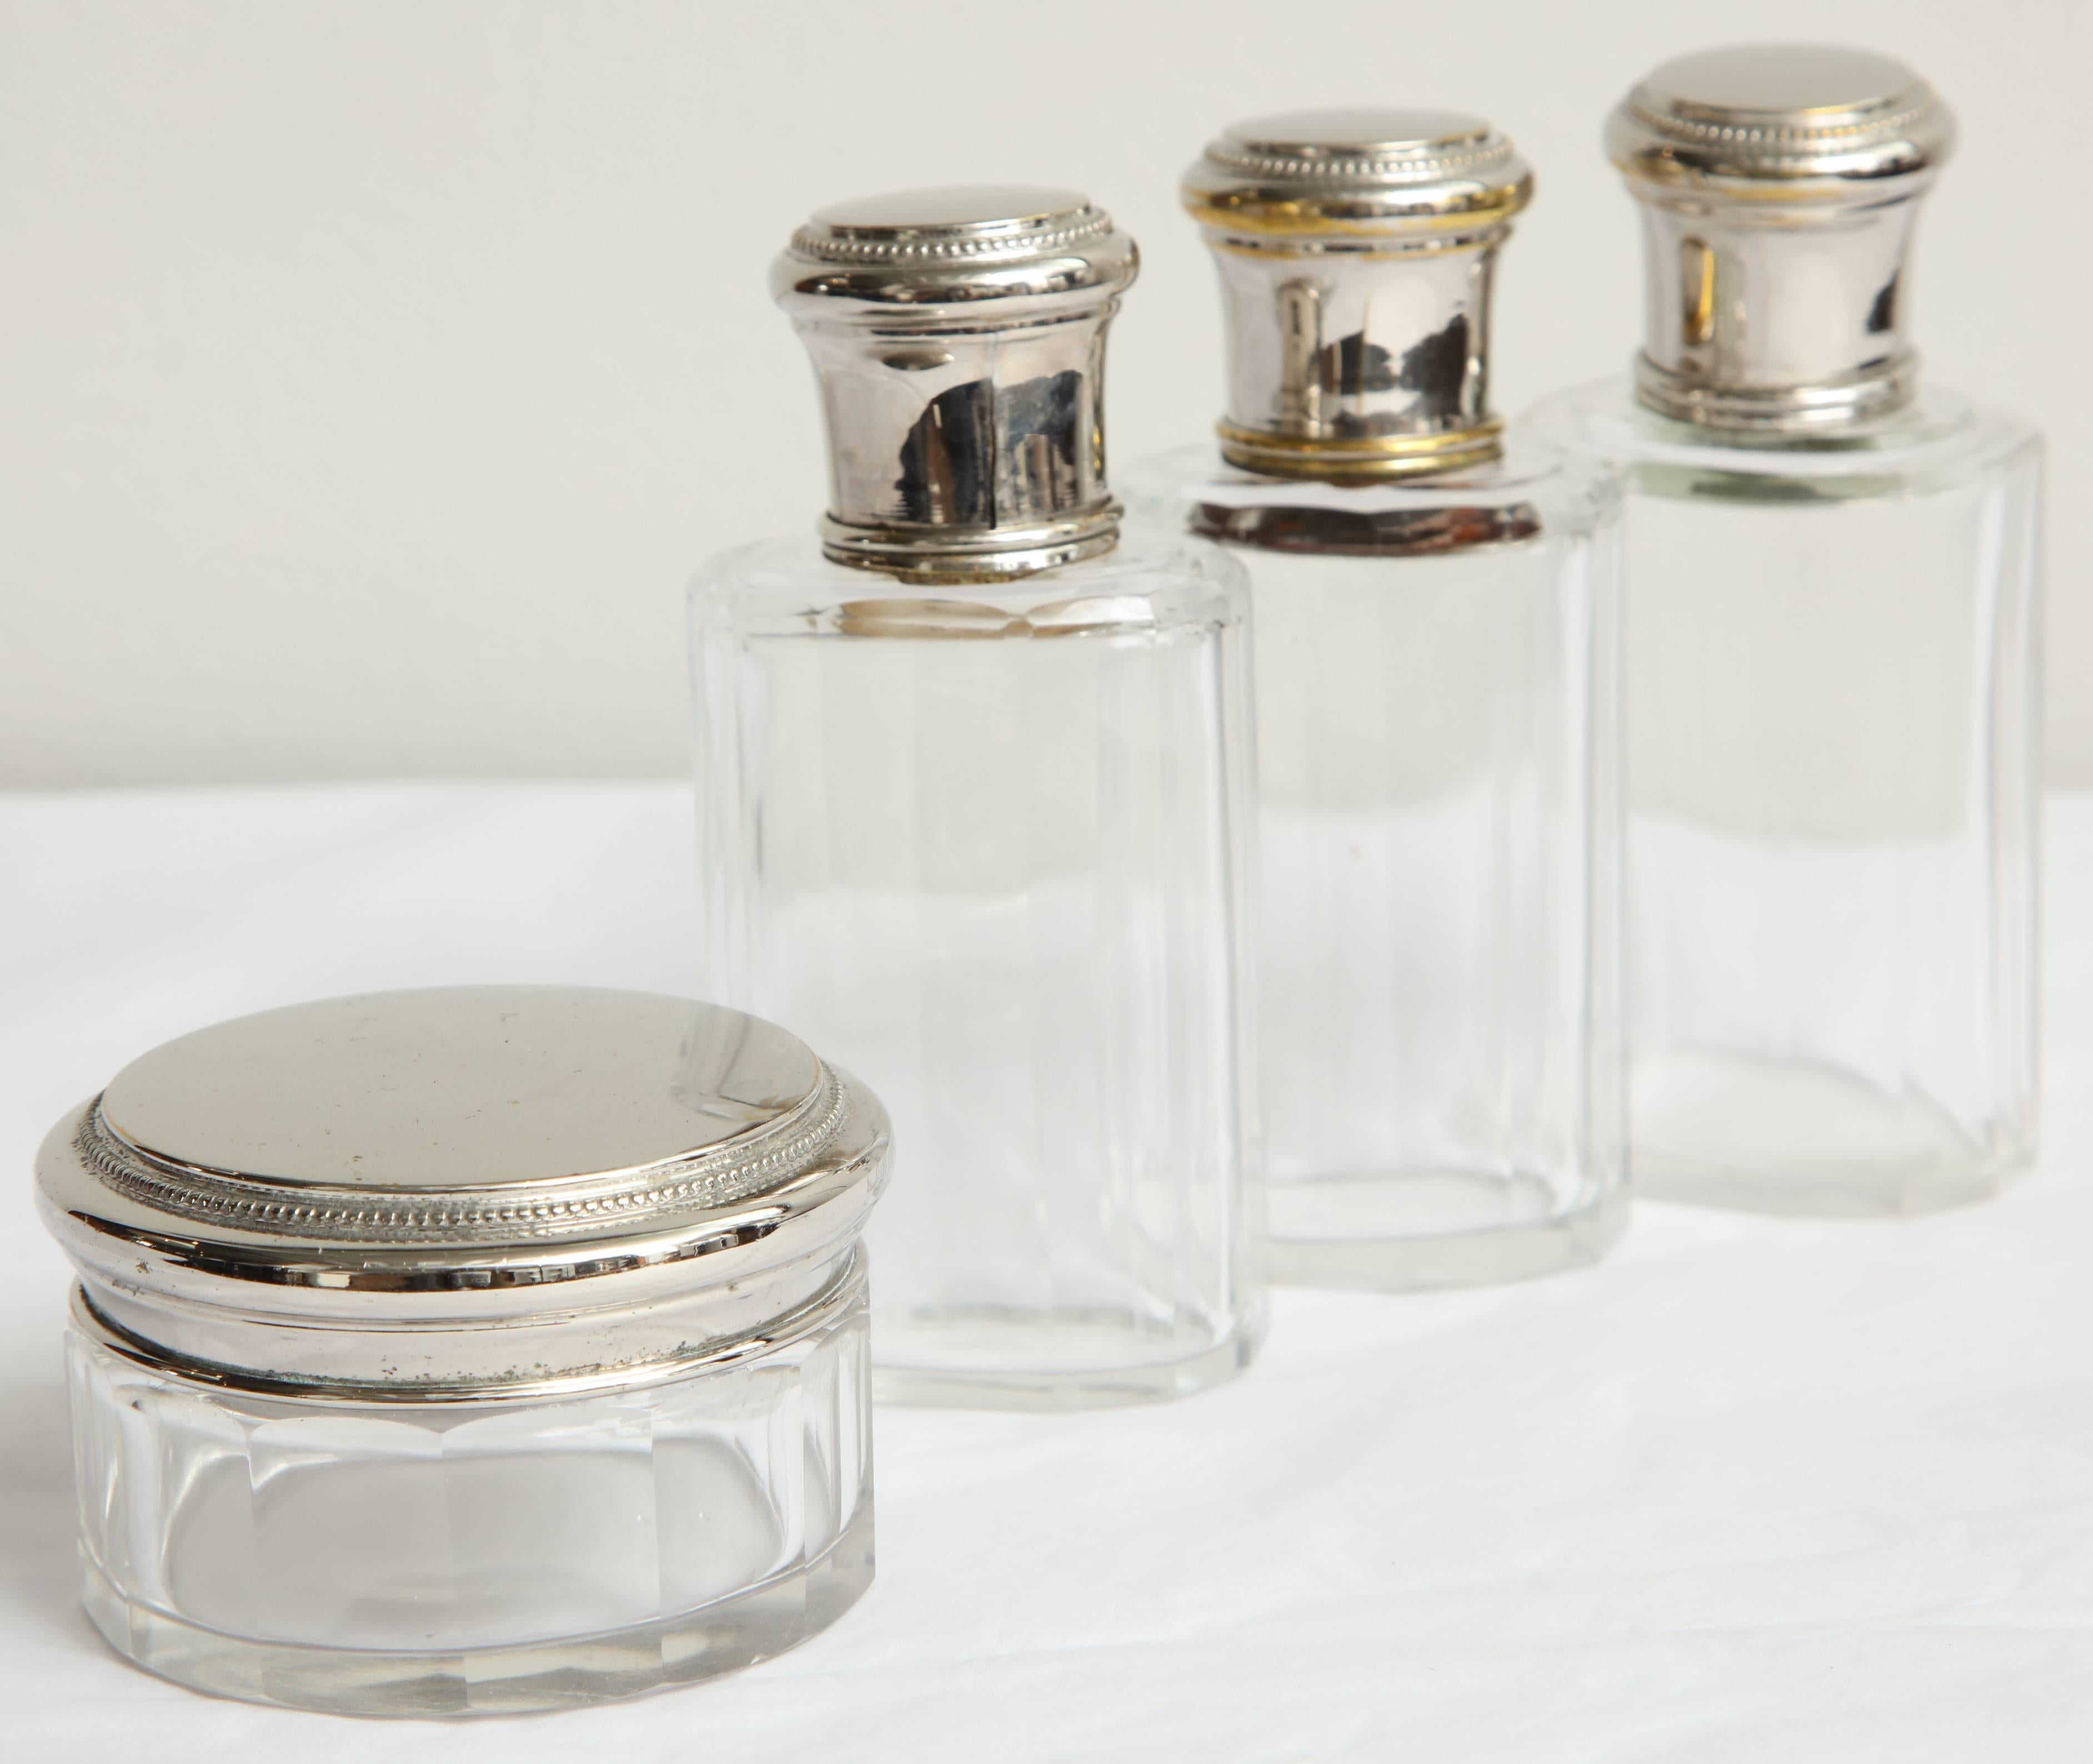 Set of four sterling silver and crystal toiletry bottles with covered round jar
Jar dimensions: 1.75